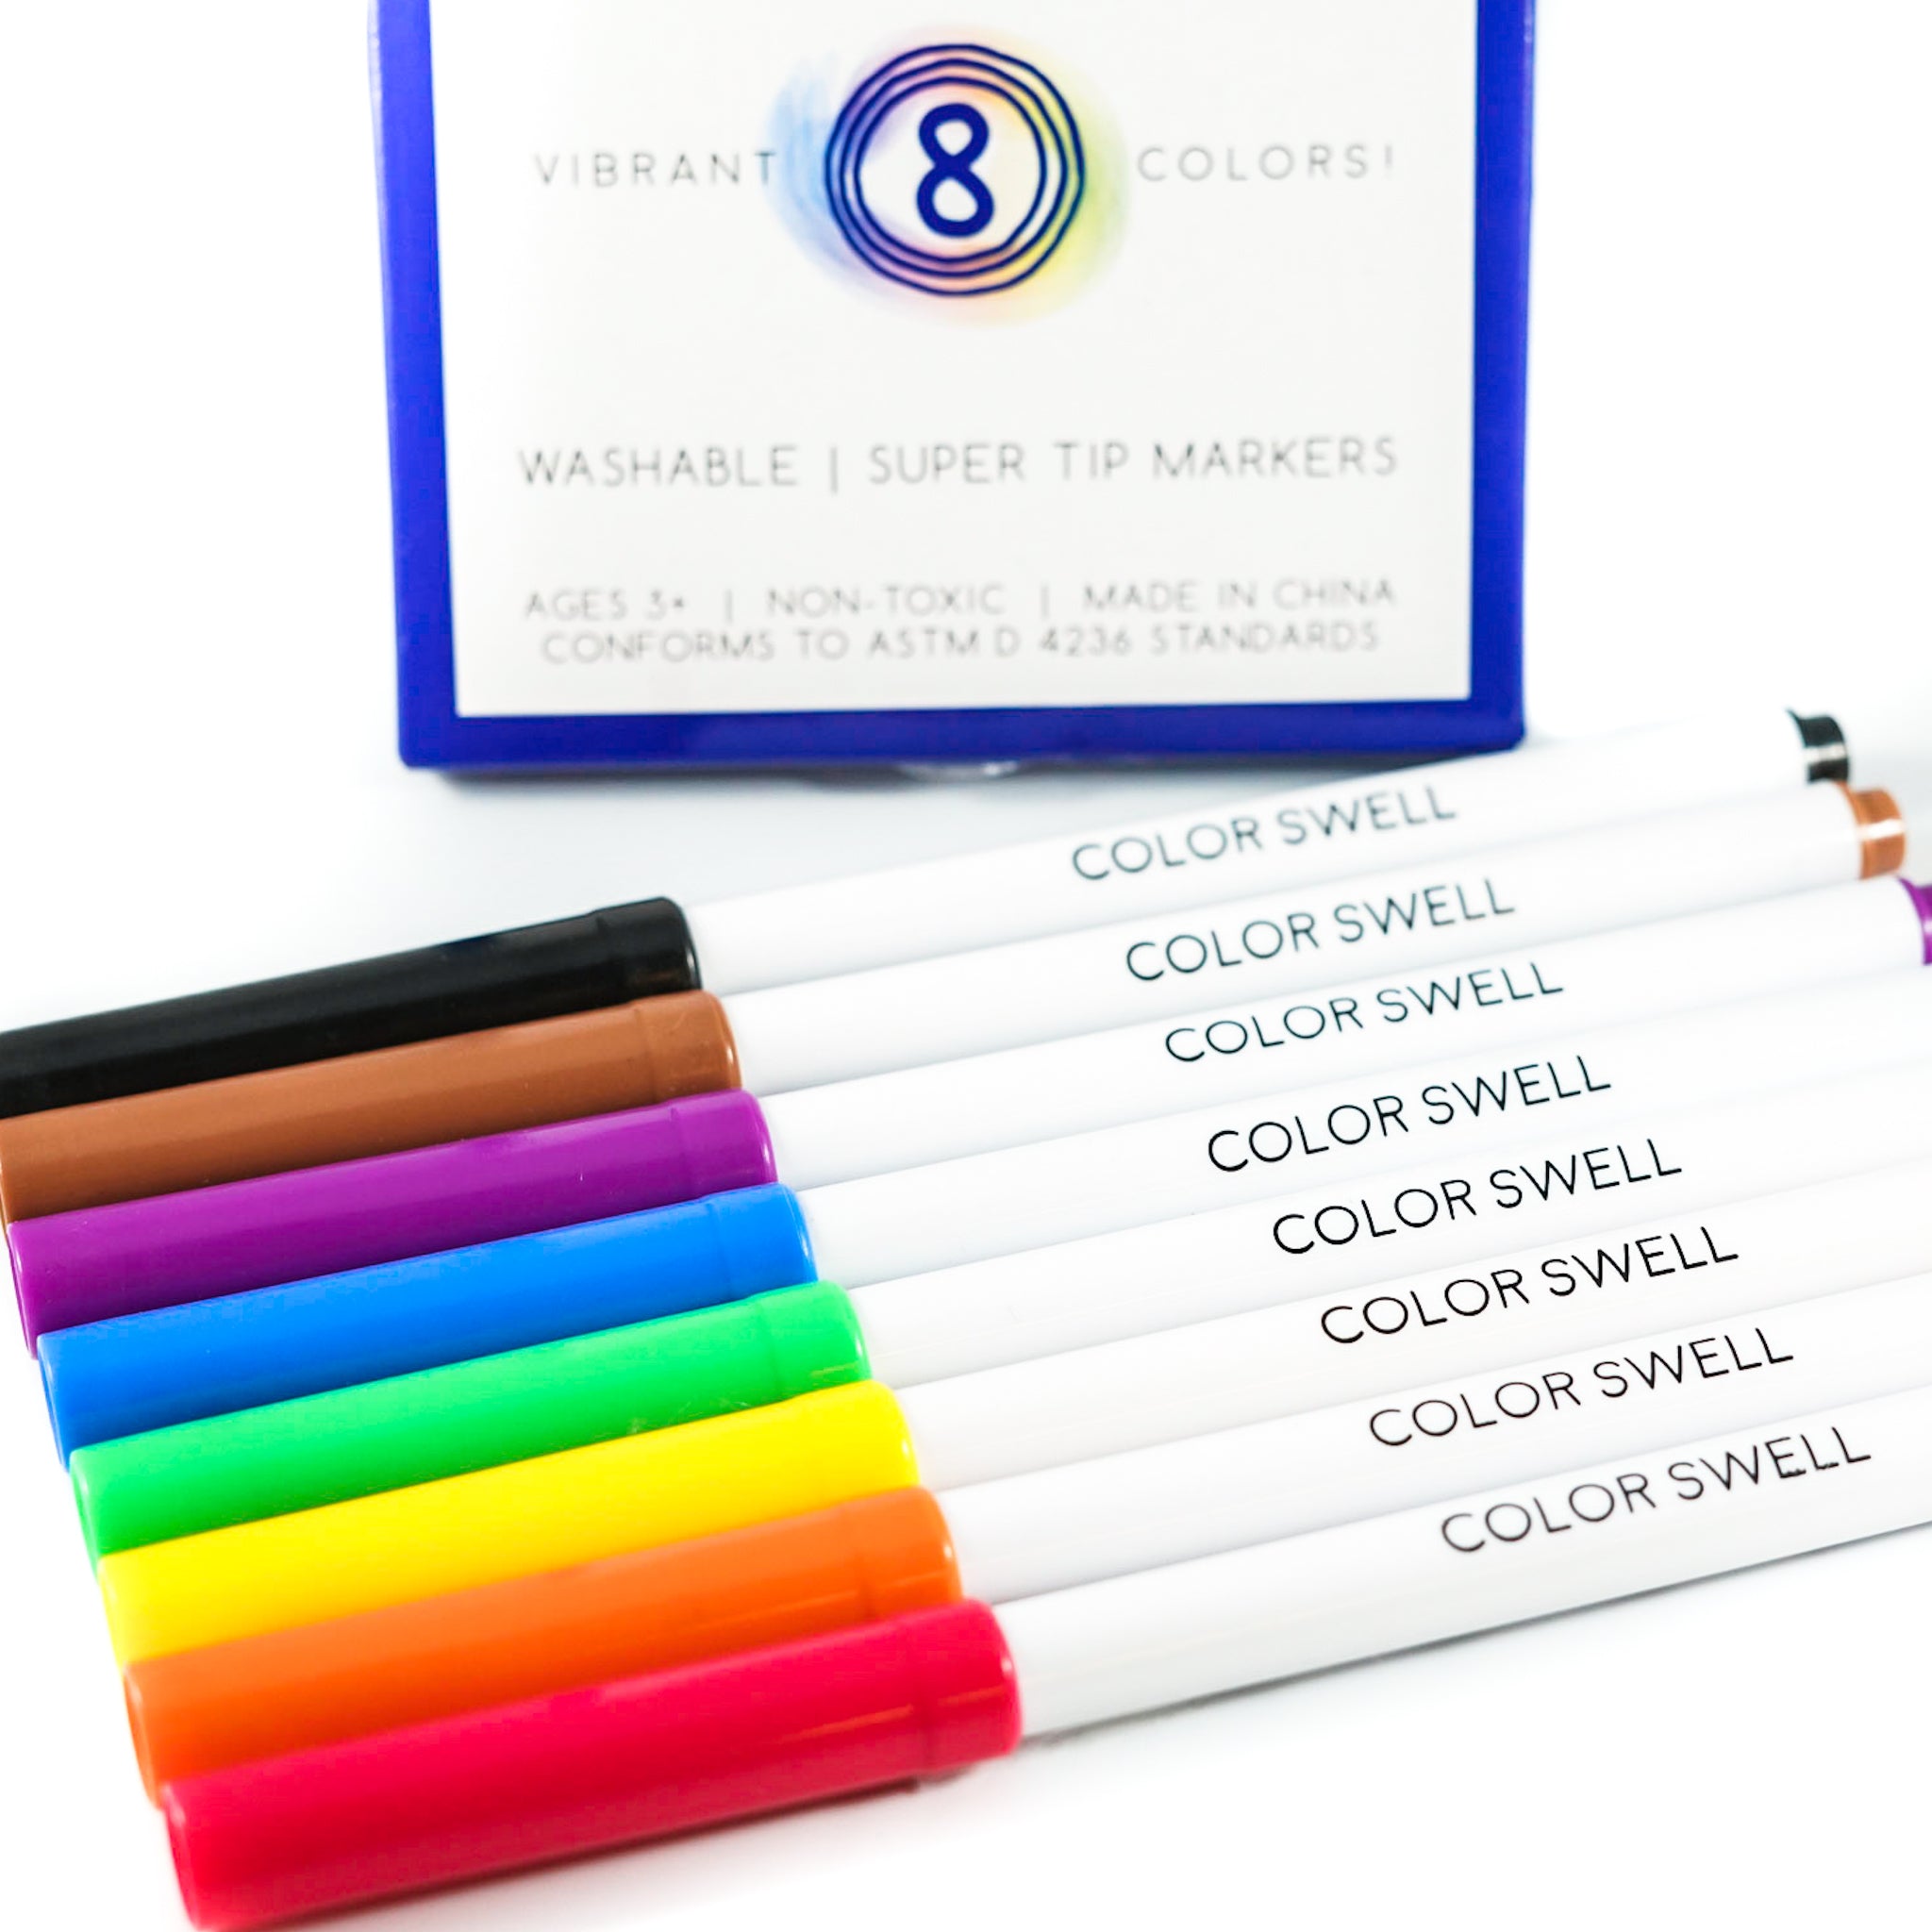 I. Introduction to Vibrant Marker Coloring